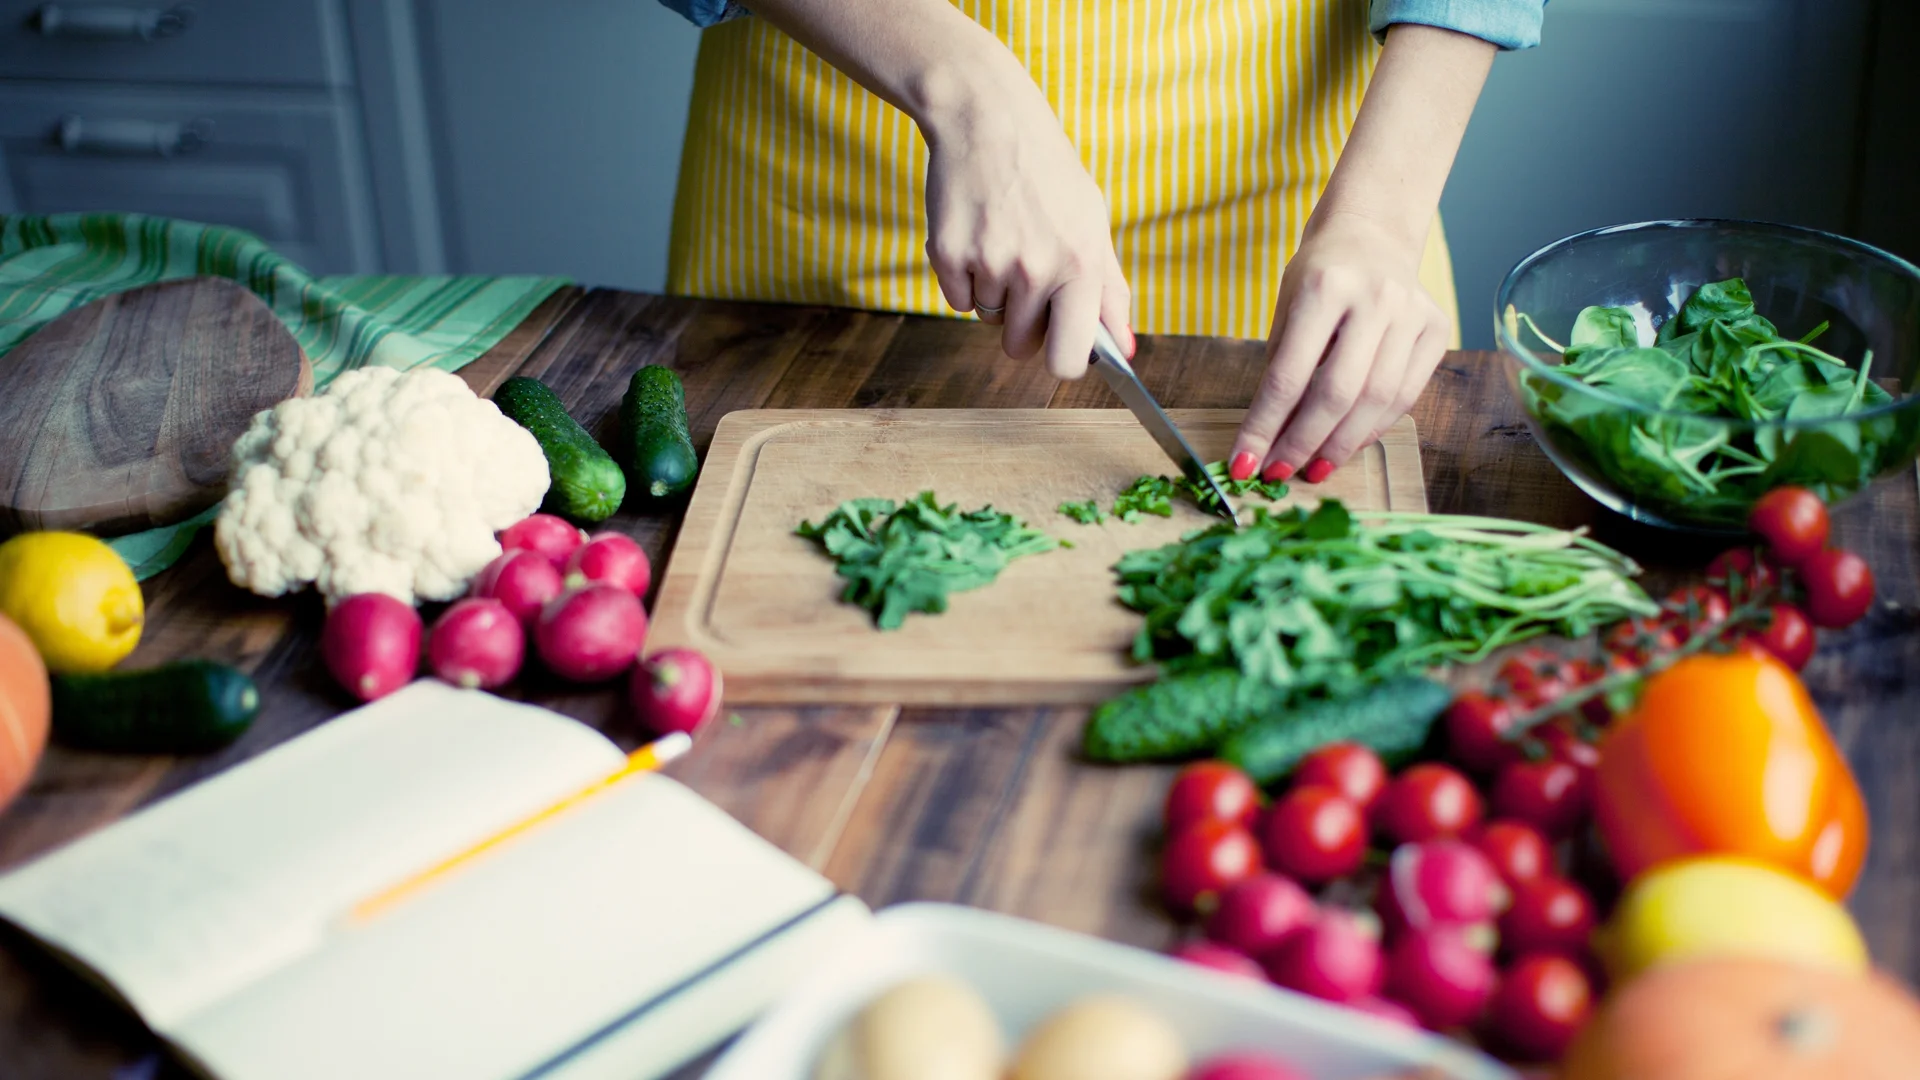 How chopping vegetables changes their nutritional content